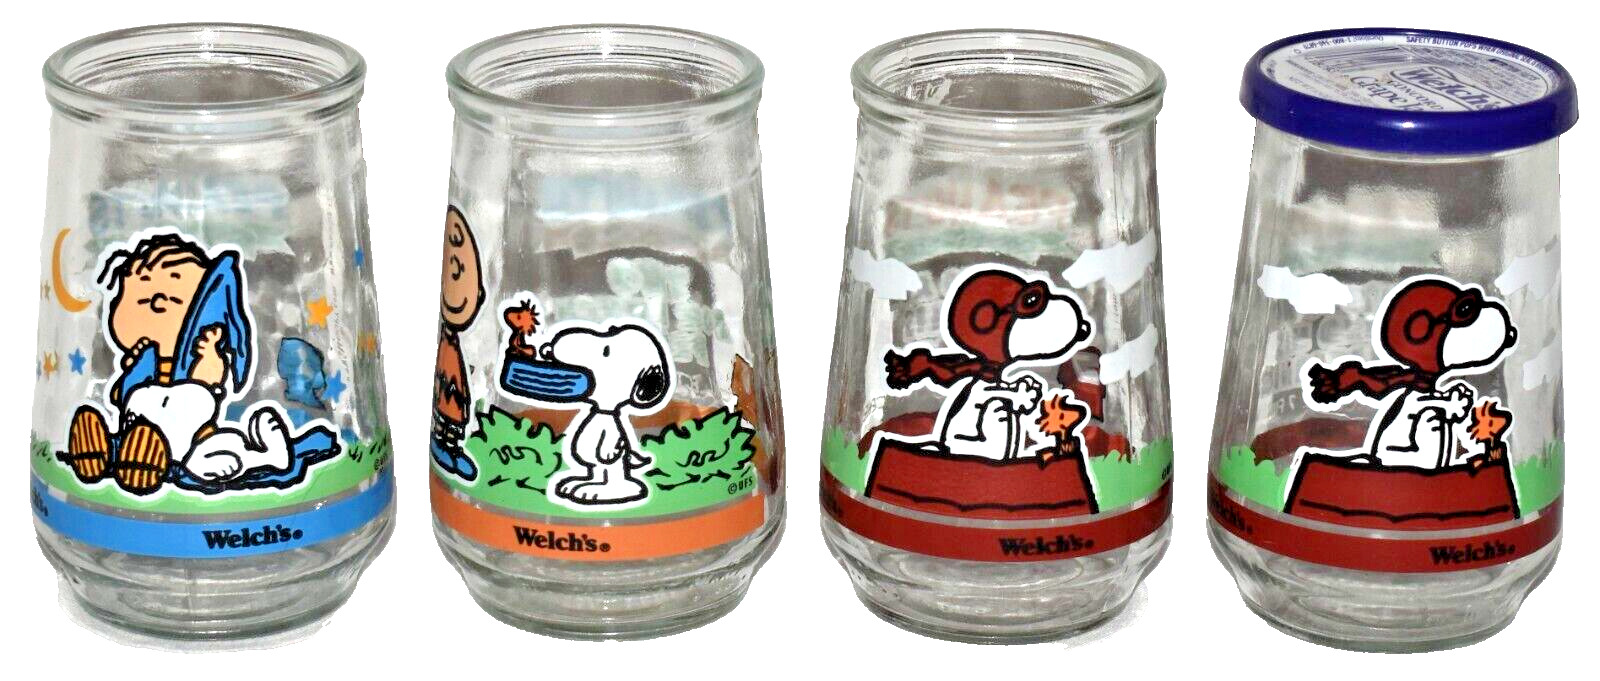 Vintage Welch's Peanuts Gang Snoopy Promo Jelly Jars Glasses Lot Of 4 #2 #6 #7